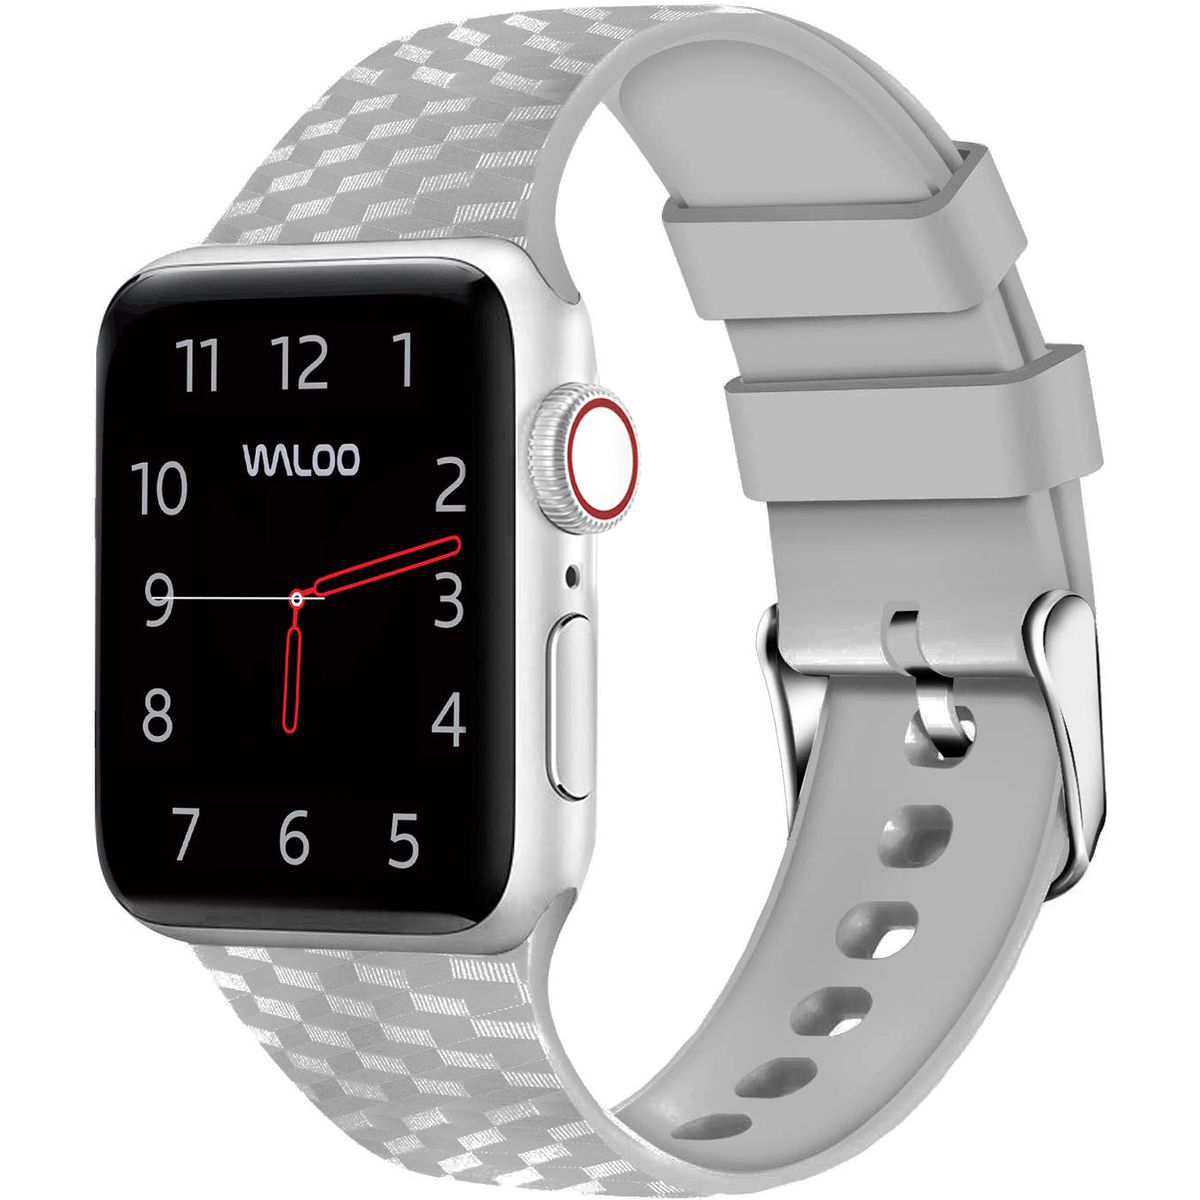 Photos - Watch Strap Waloo Products Carbon Fiber Silicone Band for Apple Watch Series 1-9 - 38/